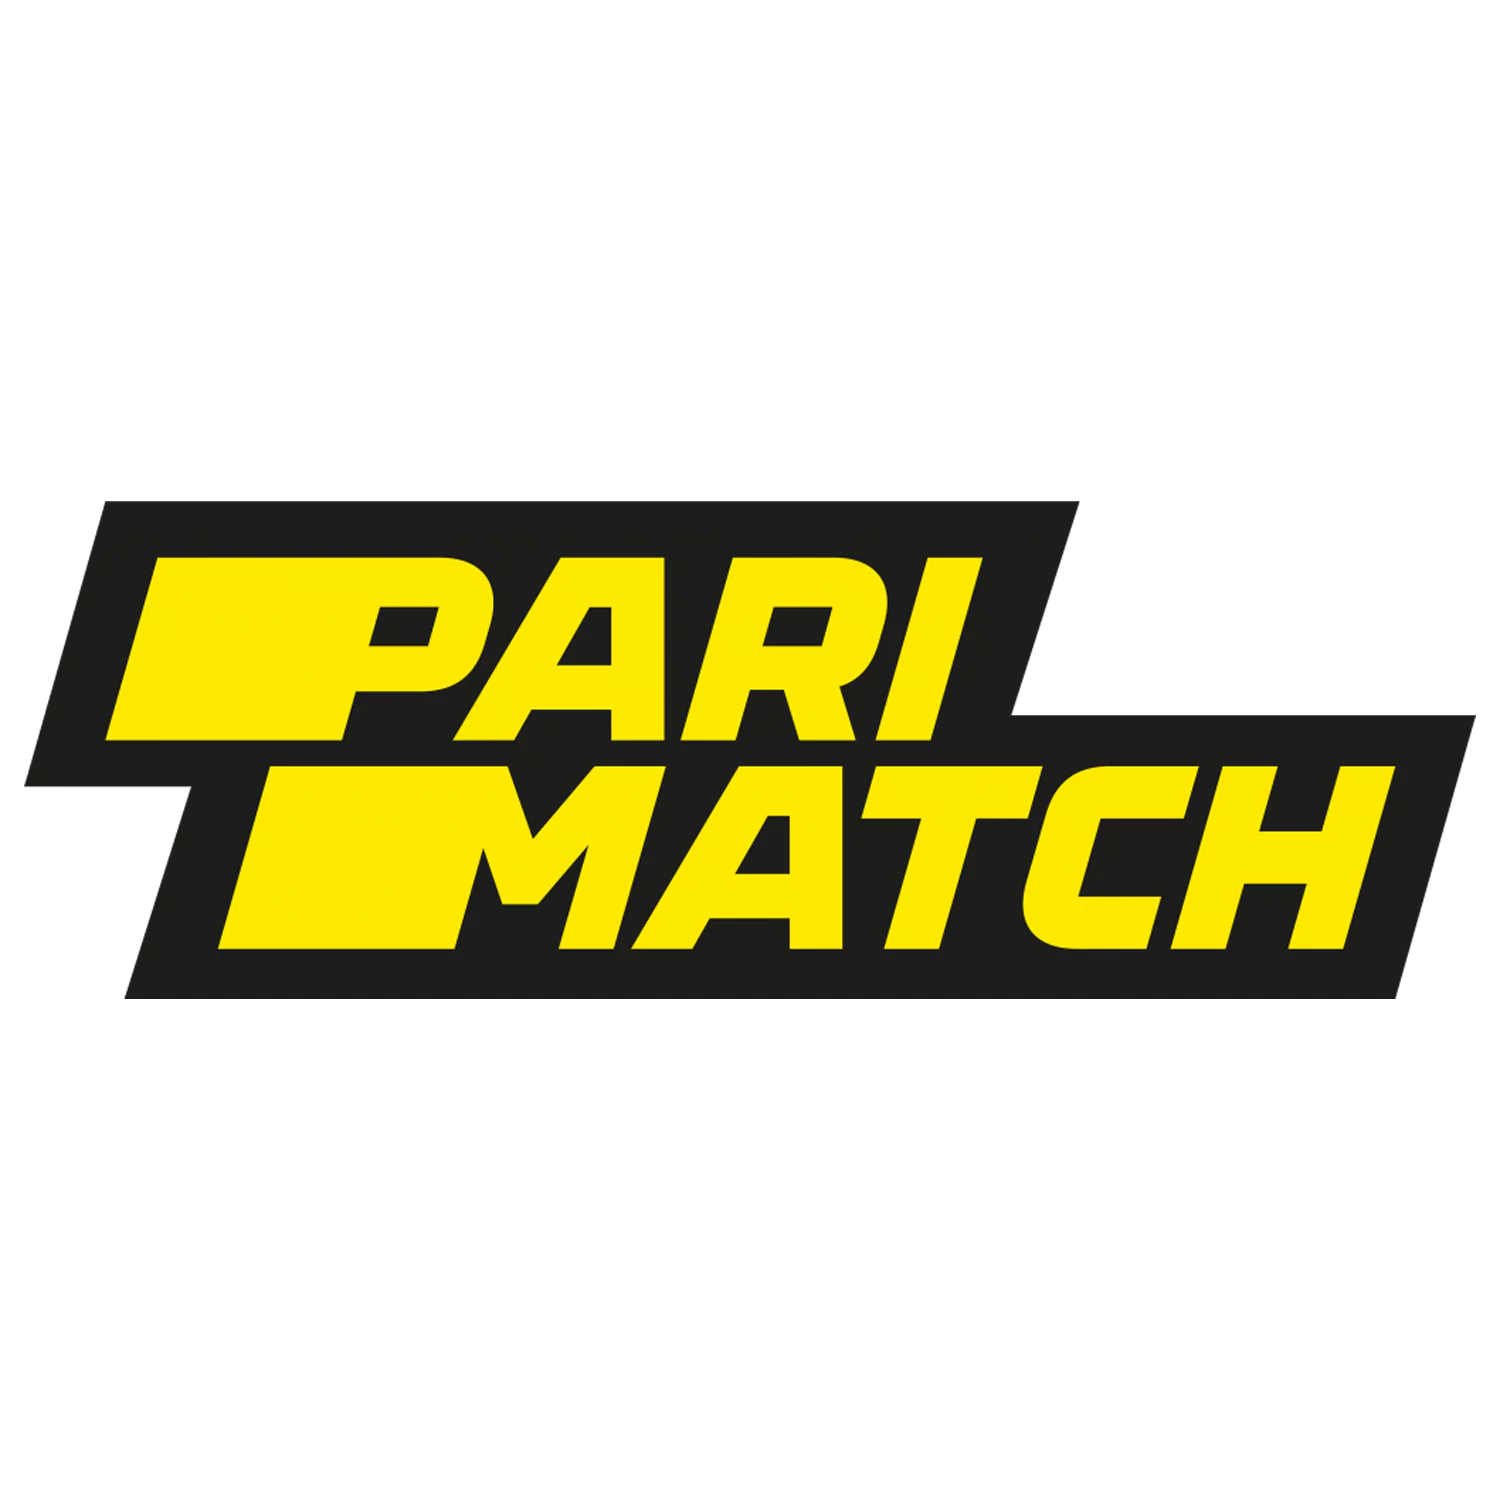 Parimatch is a relatively new betting site for Indian users.